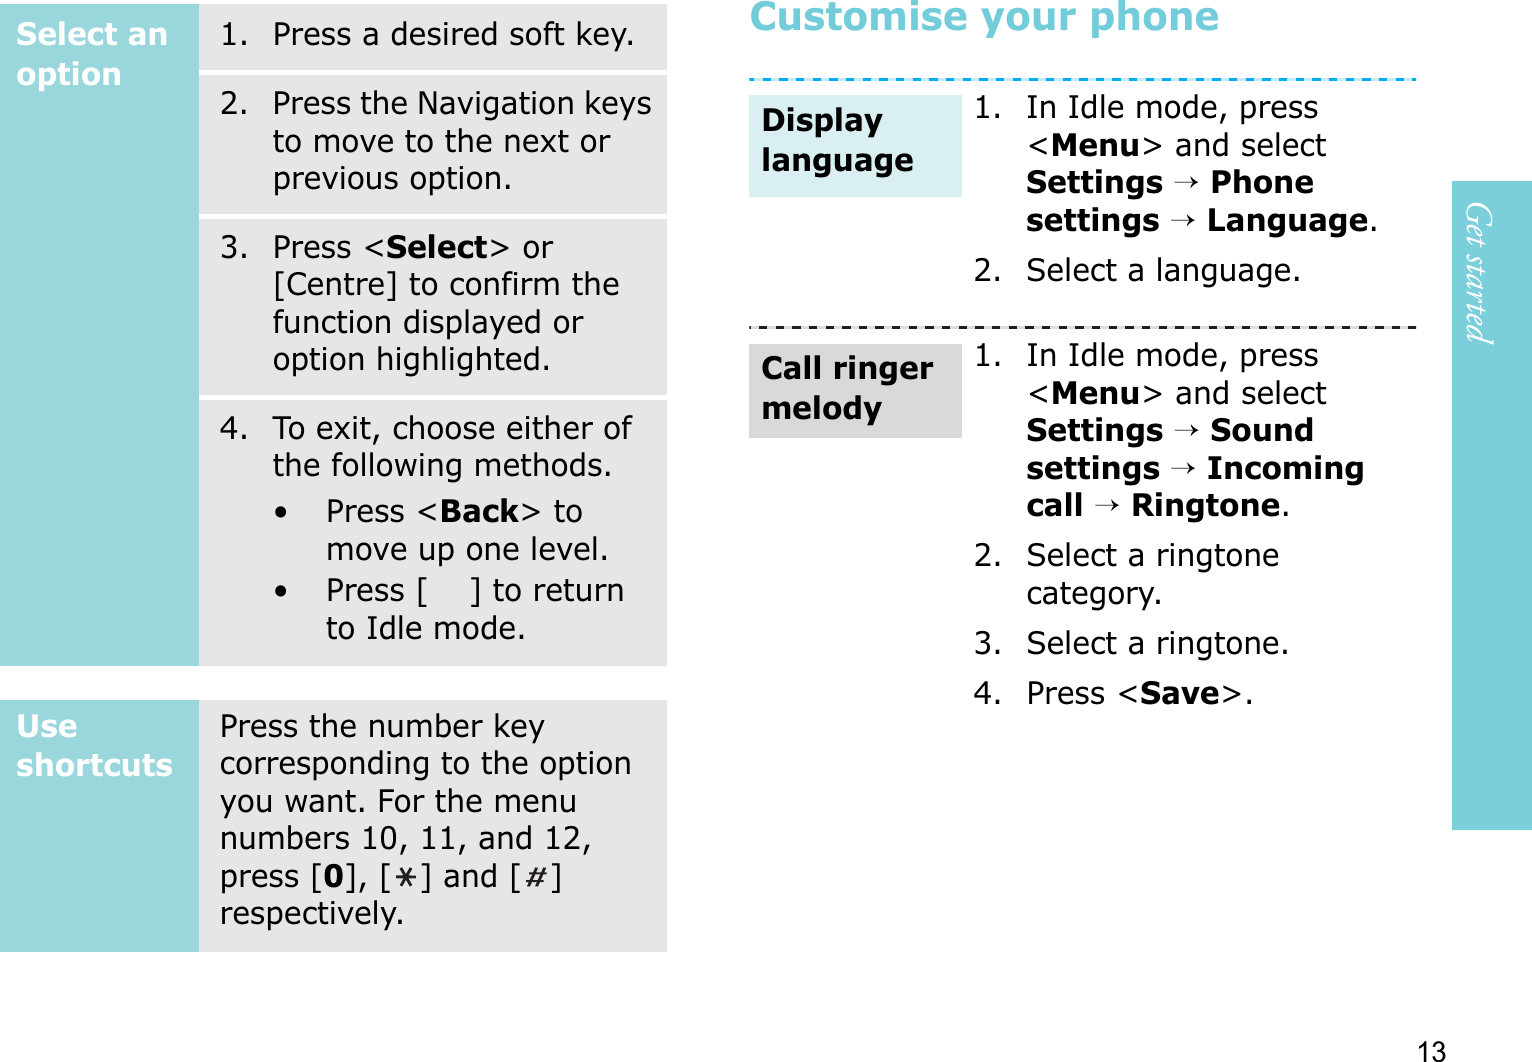 Get started13Customise your phoneSelect an option1. Press a desired soft key.2. Press the Navigation keys to move to the next or previous option.3. Press &lt;Select&gt; or [Centre] to confirm the function displayed or option highlighted.4. To exit, choose either of the following methods.• Press &lt;Back&gt; to move up one level.• Press [ ] to return to Idle mode.Use shortcutsPress the number key corresponding to the option you want. For the menu numbers 10, 11, and 12, press [0], [] and [] respectively.1. In Idle mode, press &lt;Menu&gt; and select Settings→Phone settings→Language.2. Select a language.1. In Idle mode, press &lt;Menu&gt; and select Settings→Sound settings→Incoming call→Ringtone.2. Select a ringtone category.3. Select a ringtone.4. Press &lt;Save&gt;.Display languageCall ringer melody